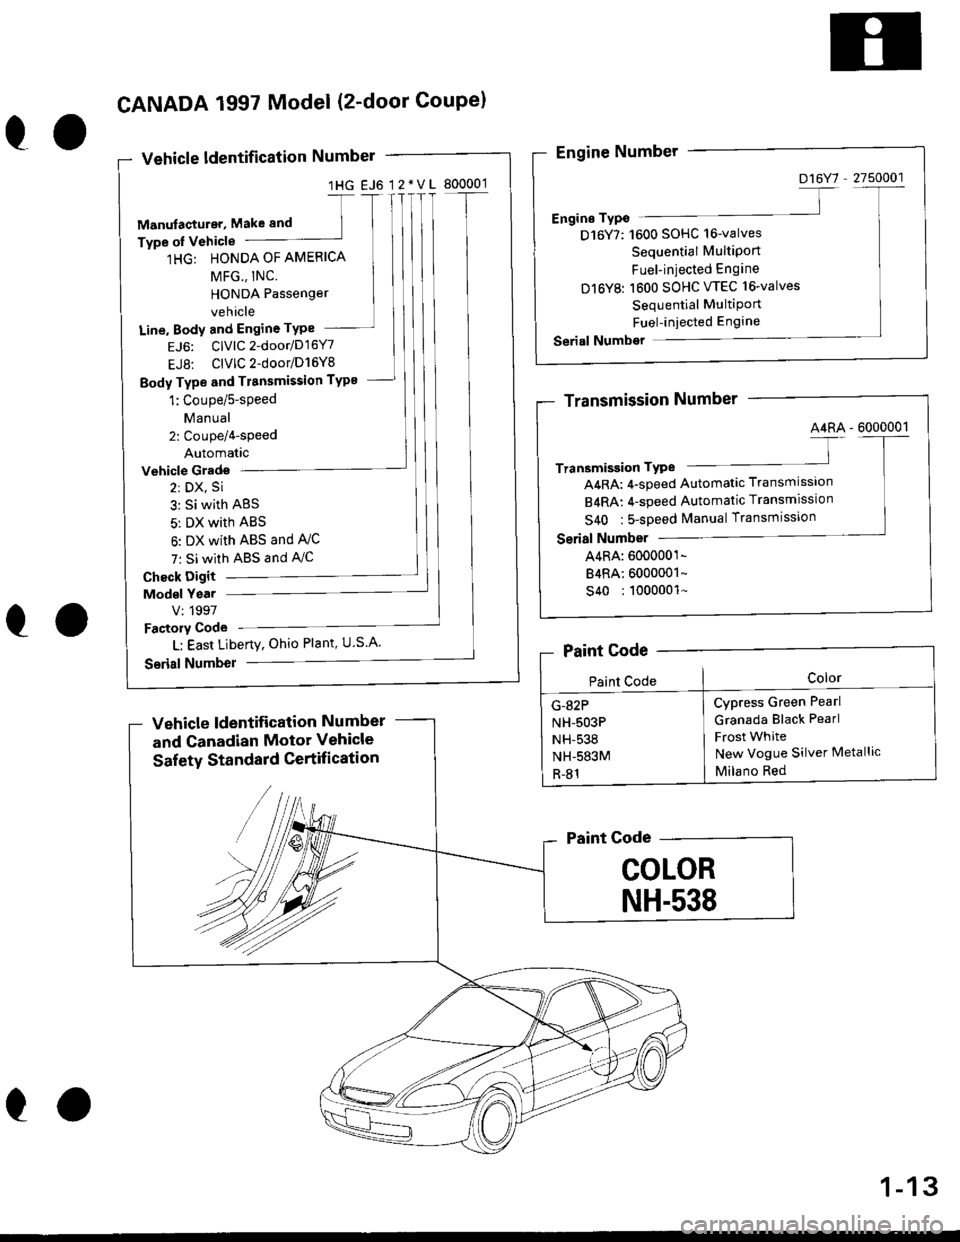 HONDA CIVIC 2000 6.G Workshop Manual 1HG EJ6 12*VL 800001
1HG: HONDA OF AMERICA
Line, Body and Engine TYPe
EJ6: ClvlC2-door/D16Y7
EJ8: ClVlC2-door/D16Y8
Body Type and Tr8nsmission TYP8
Vehicle Grado
2: DX, Si
3: Si with ABS
5: DX with AB